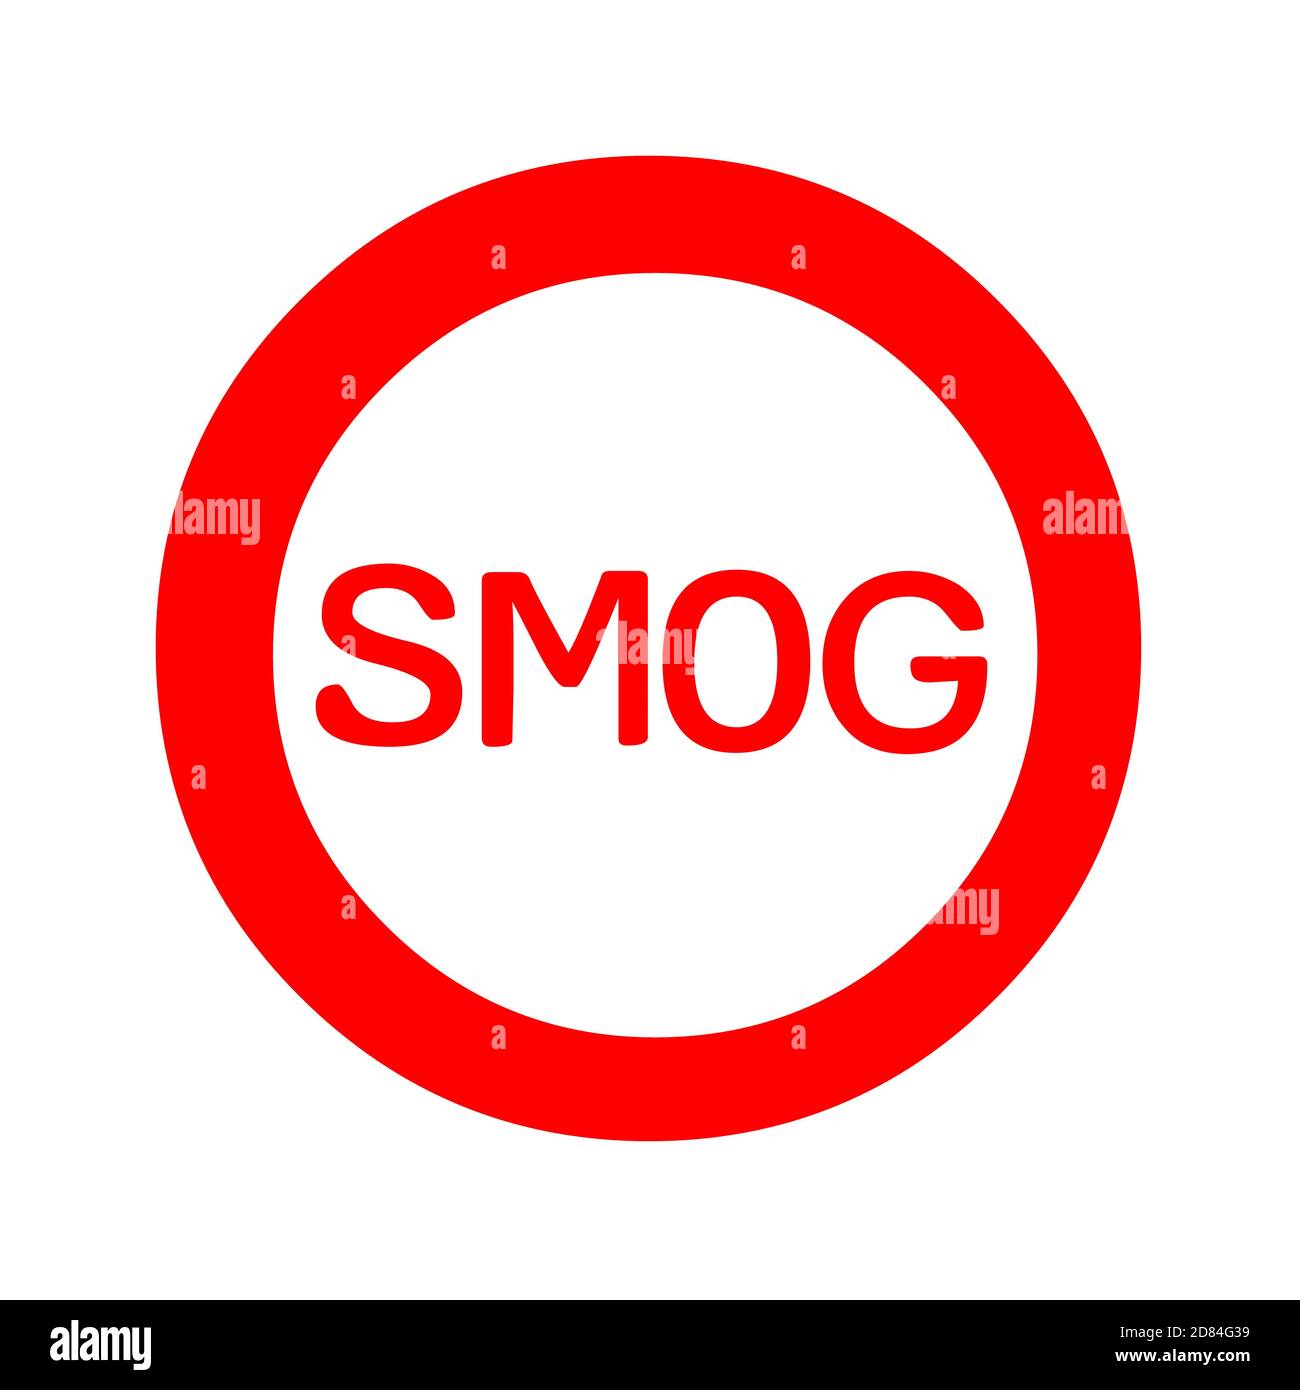 Smog road sign with a white background Stock Photo